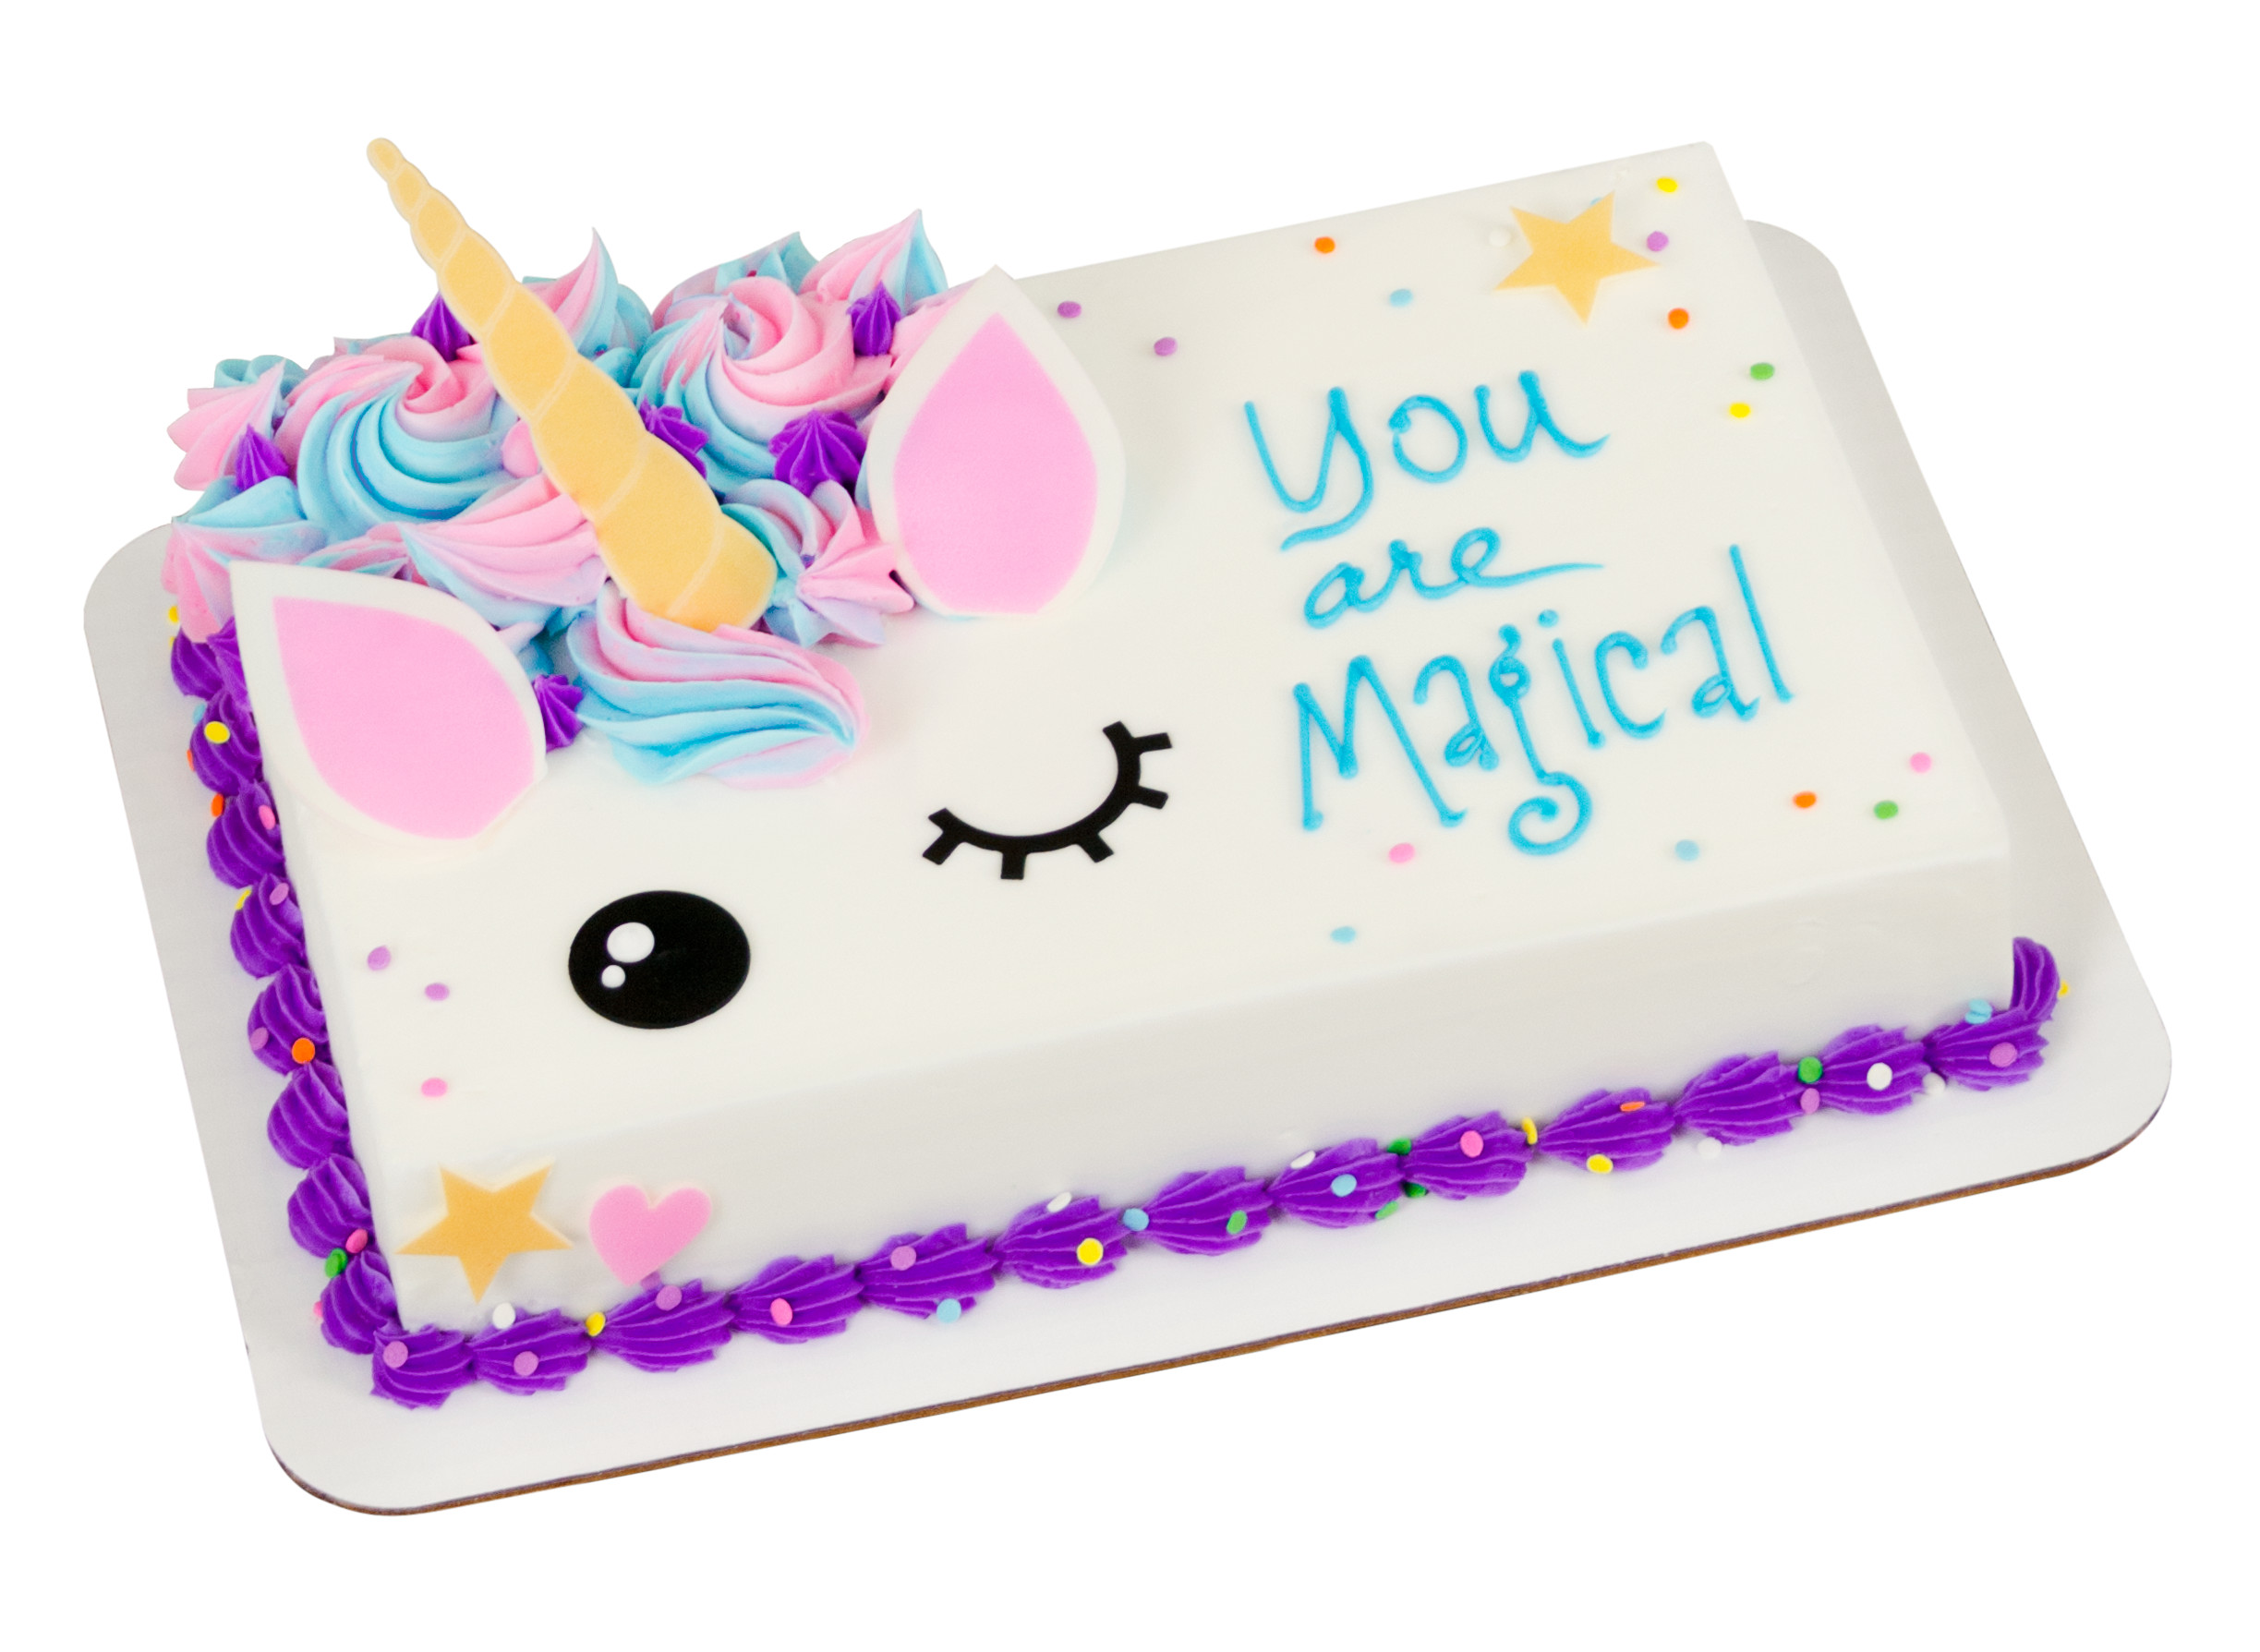 You won't Believe This.. 47+ Reasons for Unicorn Sheet Cake Idea? You